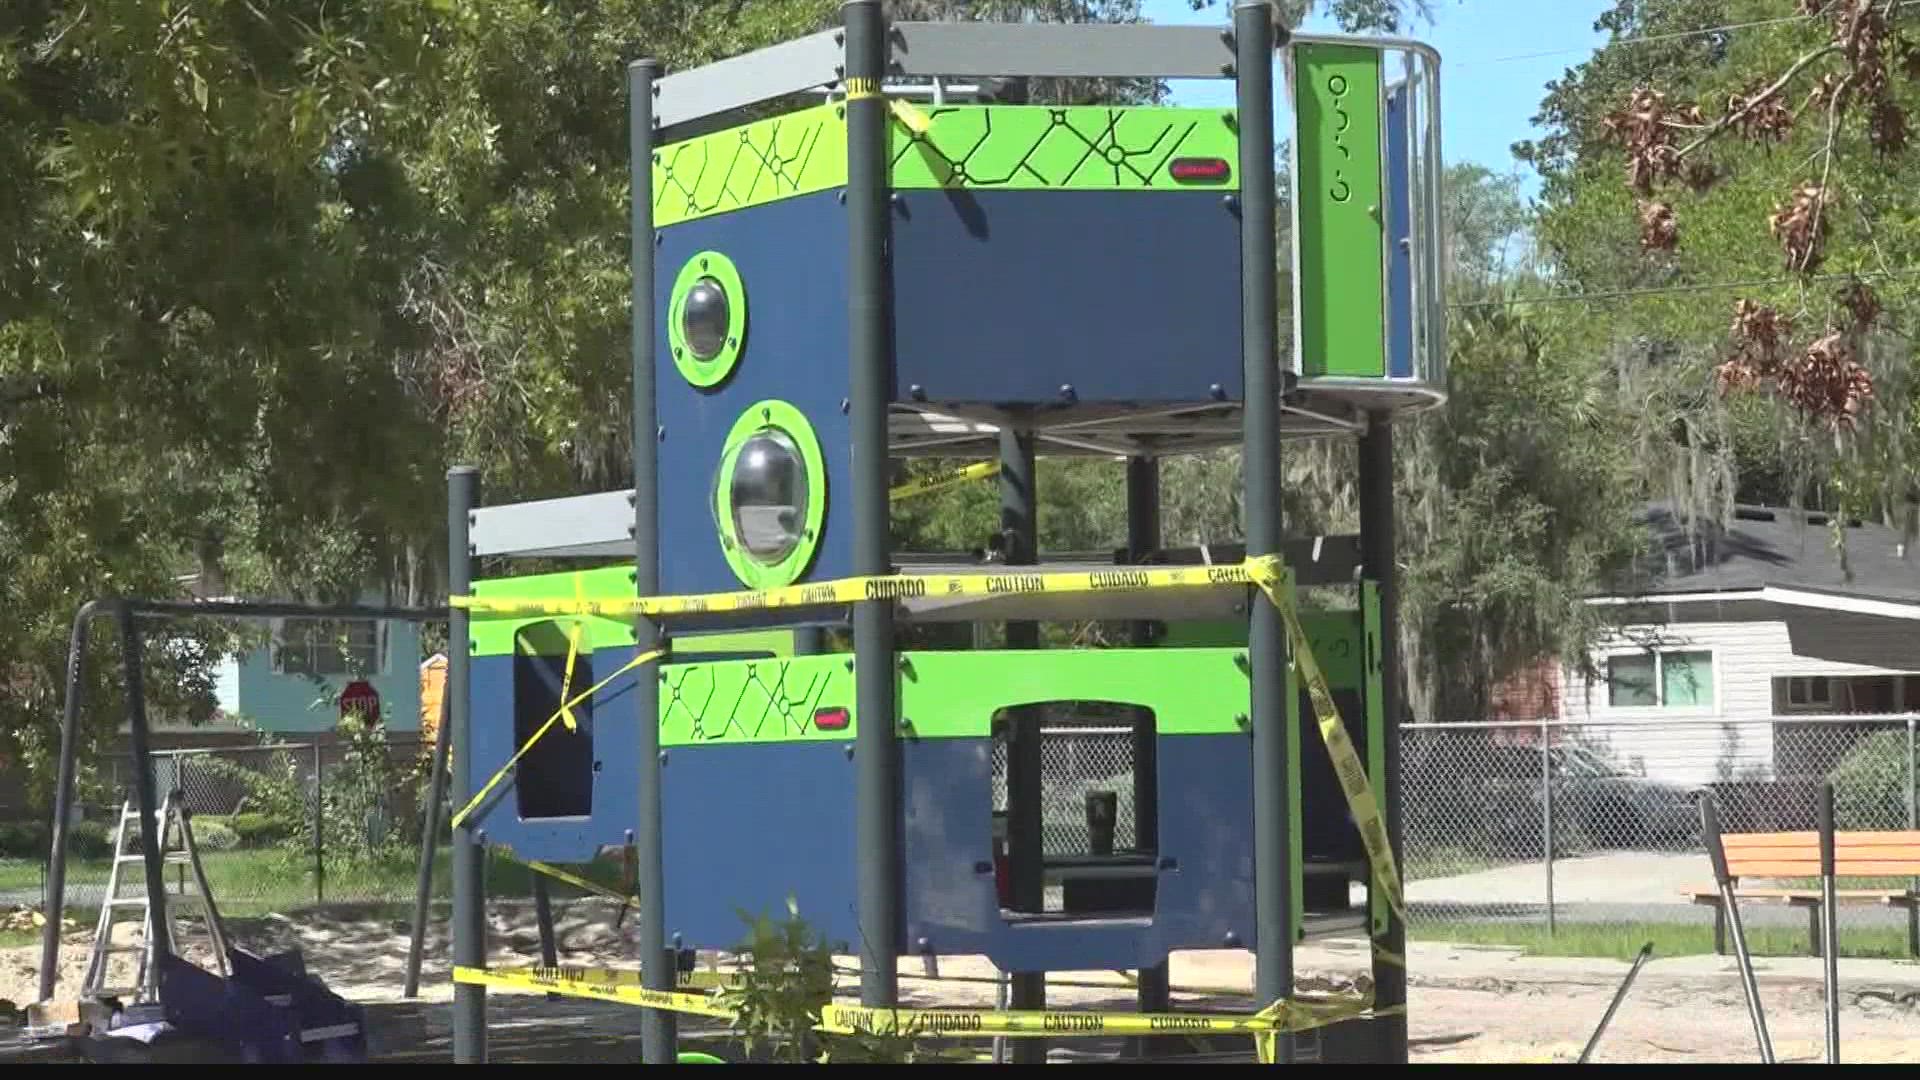 The City of Jacksonville will assess other damage in the park to determine if more replacements are needed.